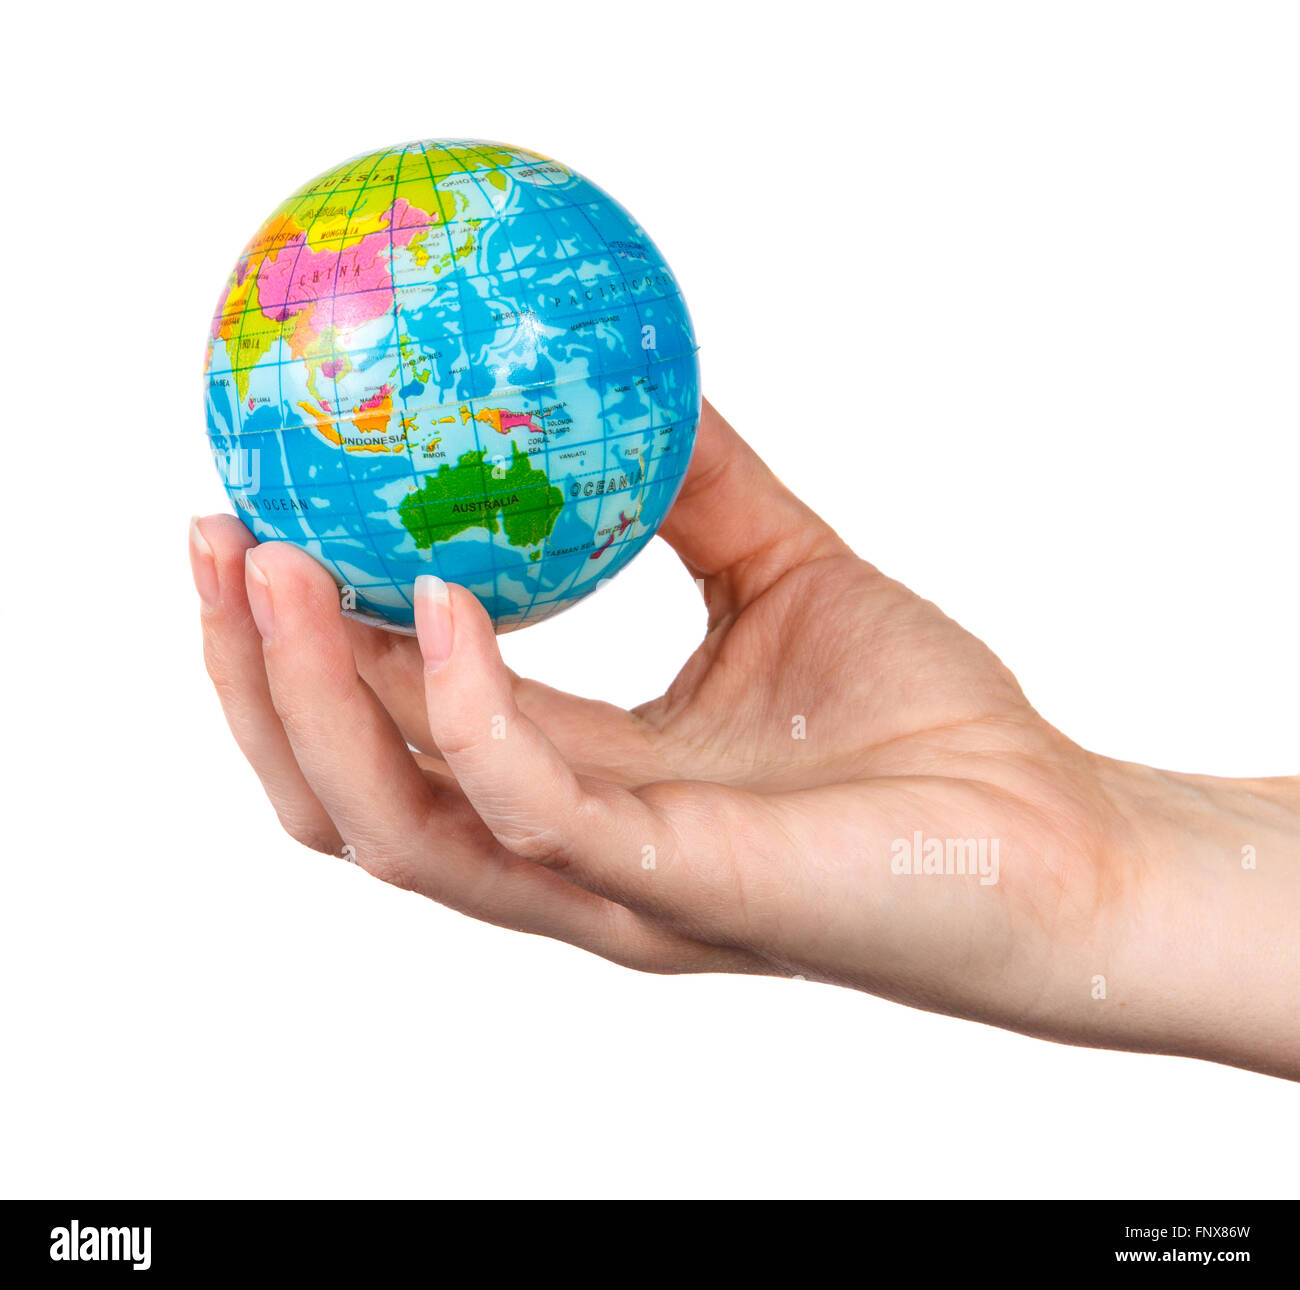 small model of the globe in the hand of the girl on a white back Stock Photo